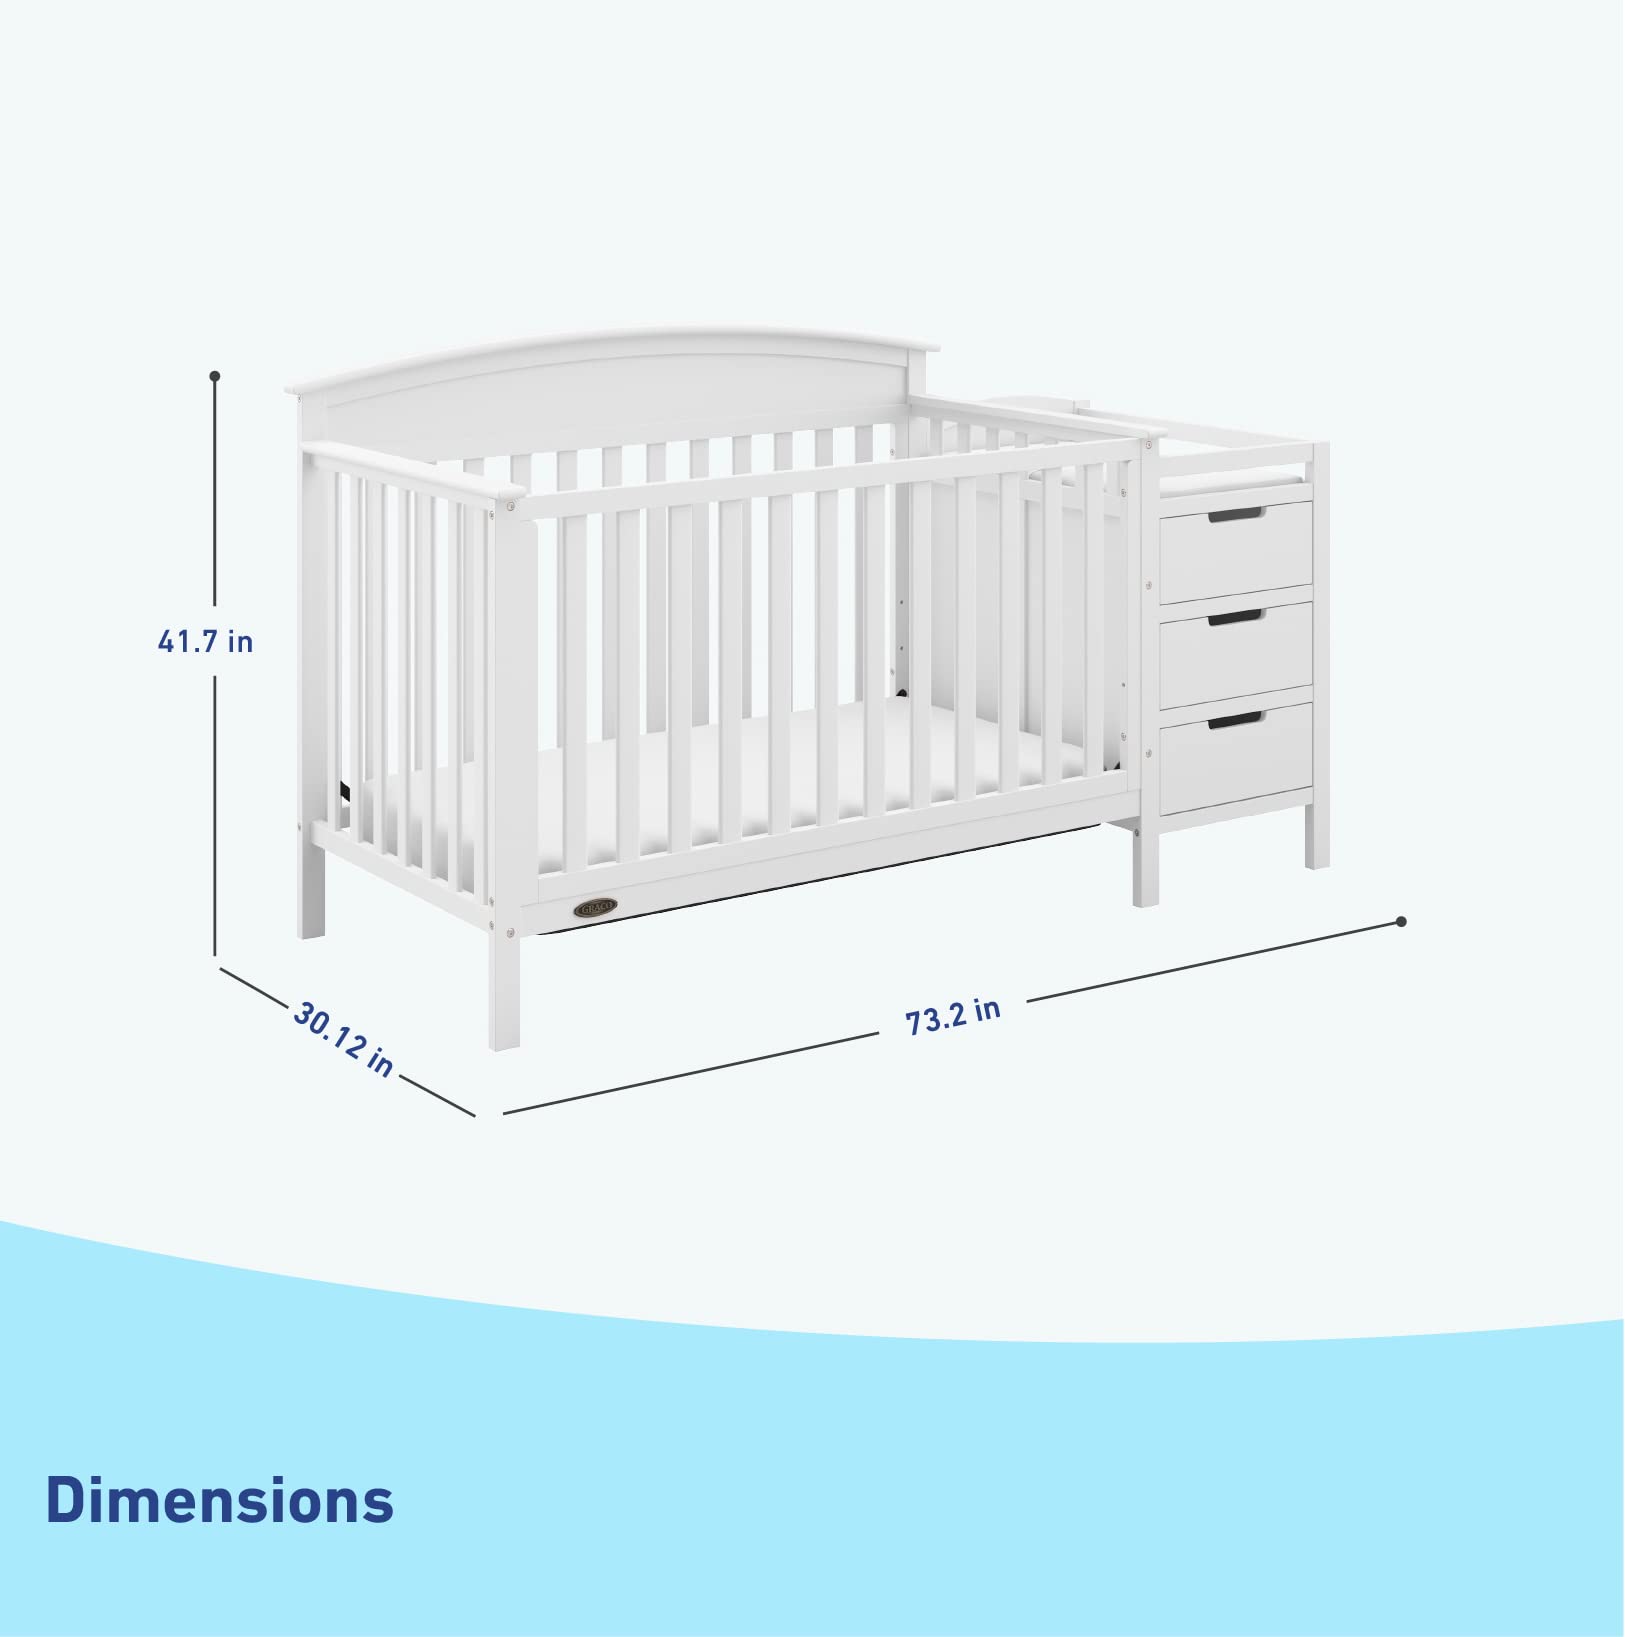 Graco Benton 4-in-1 Convertible Crib and Changer (White) – Crib and Changing Table Combo, Includes Water-Resistant Changing Pad, 3 Drawers, Converts to Toddler Bed, Daybed and Full-Size Bed